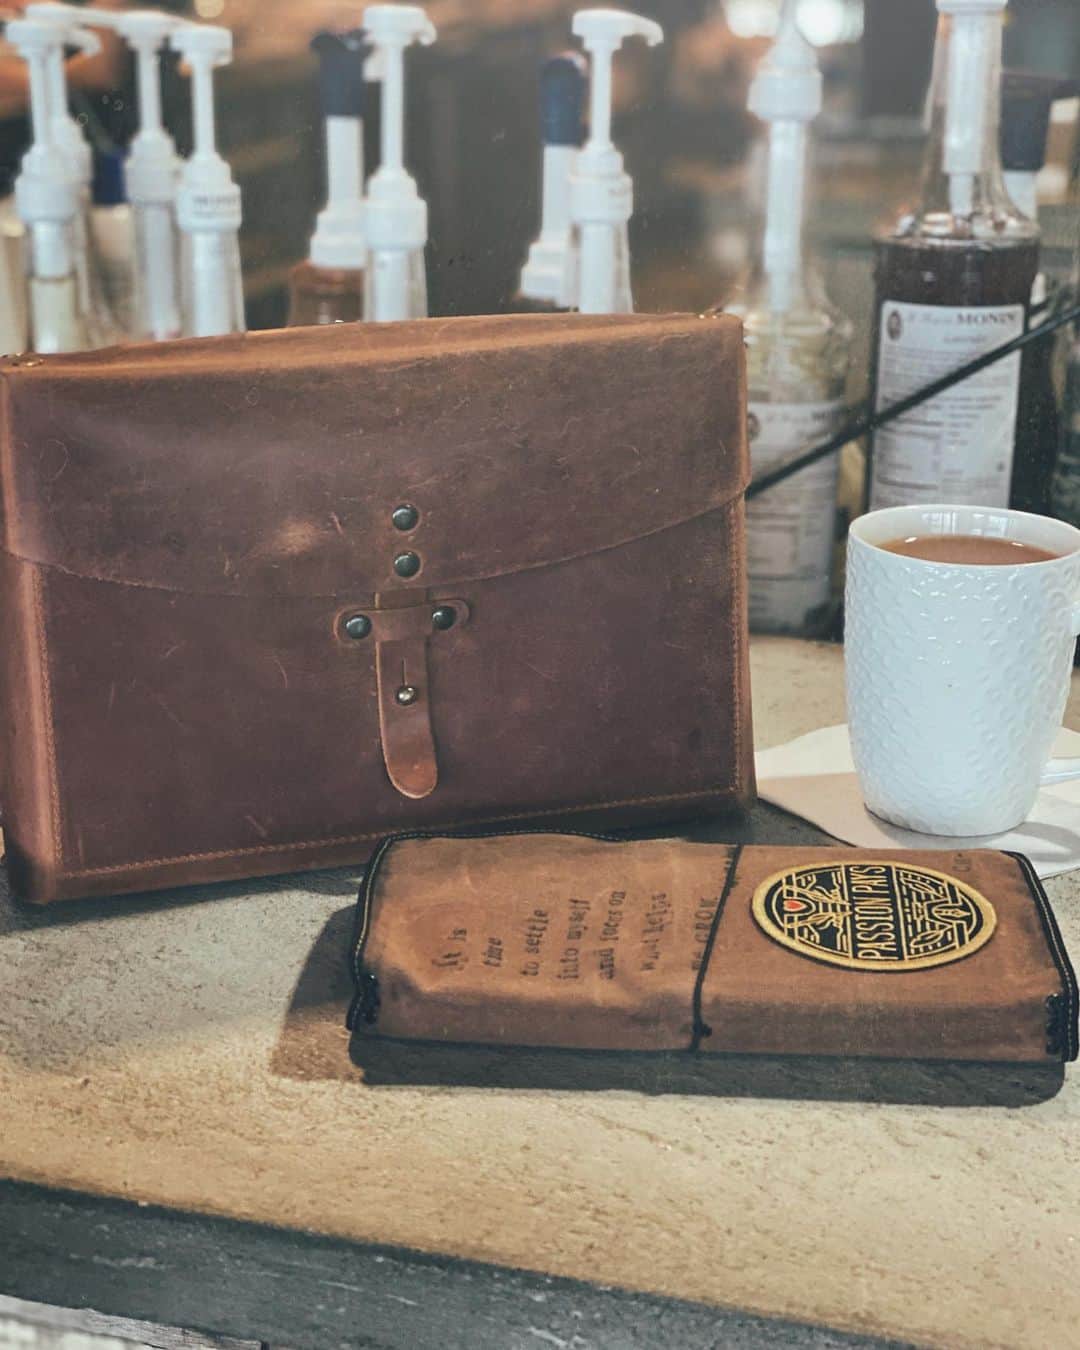 Catharine Mi-Sookさんのインスタグラム写真 - (Catharine Mi-SookInstagram)「Enjoying some quiet time at the local cafe with a hot mug of rooibos chai tea and a few of my favorite accoutrements. I started a weekly self-care #bulletjournal a few months ago and it’s such a wonderful resource to flip through especially during the holiday season, which is admittedly one of my favorite times of the year, as the kid in me still finds it so magical and wondrous, and yet it’s also the most hectic (aka I feel up to my eyeballs with work, projects and family schedules) and bittersweet (missing my dad) too. I’m being intentional this year with carving out more room for self-care, honoring my own boundaries and pausing in the midst. I want to savor the joyous moments and let them be the momentum that girds all else. I know the holidays can be a mixed bag for many, so my wish is that somehow that which brings you warmth and joy finds you extra this year. From my heart and mug to yours, cheers. ♥️☕️ . . . Featuring the @montegrappaitalia Miya 450, a very limited edition and celluloid beauty with sterling silver trim and a 14k gold nib offered at an introductory discount at @penchalet through the link in my bio or penchalet.com/cmisook. . Also featuring the Writer’s Medic Bag by @galen_leather and the last design of their founder (and beloved friend) Zeynep. It’s now available on their site with an introductory discount! The best time to snag one if you can! . TN Notebook @soumkine. Personalized Vagabond Notebook in Umber waxed canvas co-designed by @franklinchristoph & myself. . . . Pen & bag were gifted to me by the brands. . . . #journaling #selfcaredaily #selfcarematters #montegrappaitalia #montegrappapen #penchalet #fountainpens #penmanship #galenleather #writingbox #leatherhandbag #whatsinmybag #franklinchristoph #loveforanalogue #vagabondnotebook #soumkine #travelersnotebook #bujoideas #bujojunkies #bulletjournalideas #bulletjournaljunkies #planneraddict #bulletjournalweekly #stationerylover #stationeryaddict #thedailywriting #coffeeshopvibes #scrapbooking」11月28日 0時18分 - catharinemisook